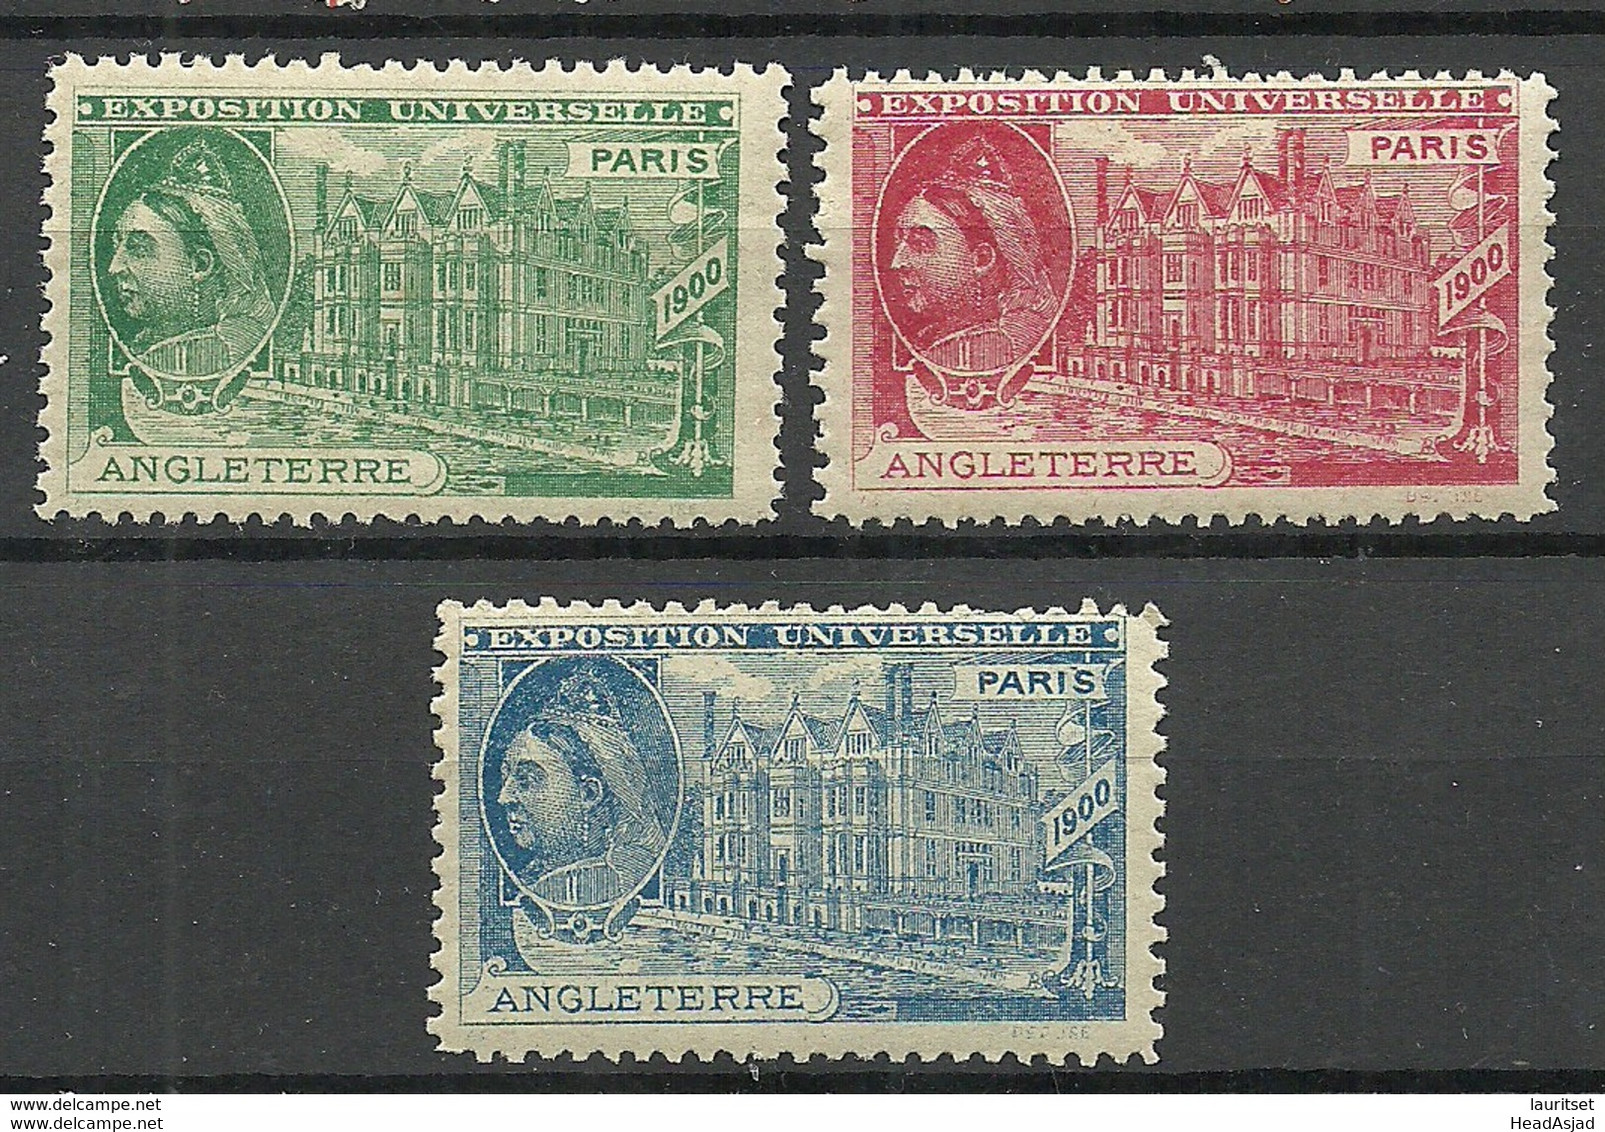 France 1900 EXPOSITION UNIVERSELLE Paris ANGLETERRE Great Britain MNH - 1900 – París (Francia)